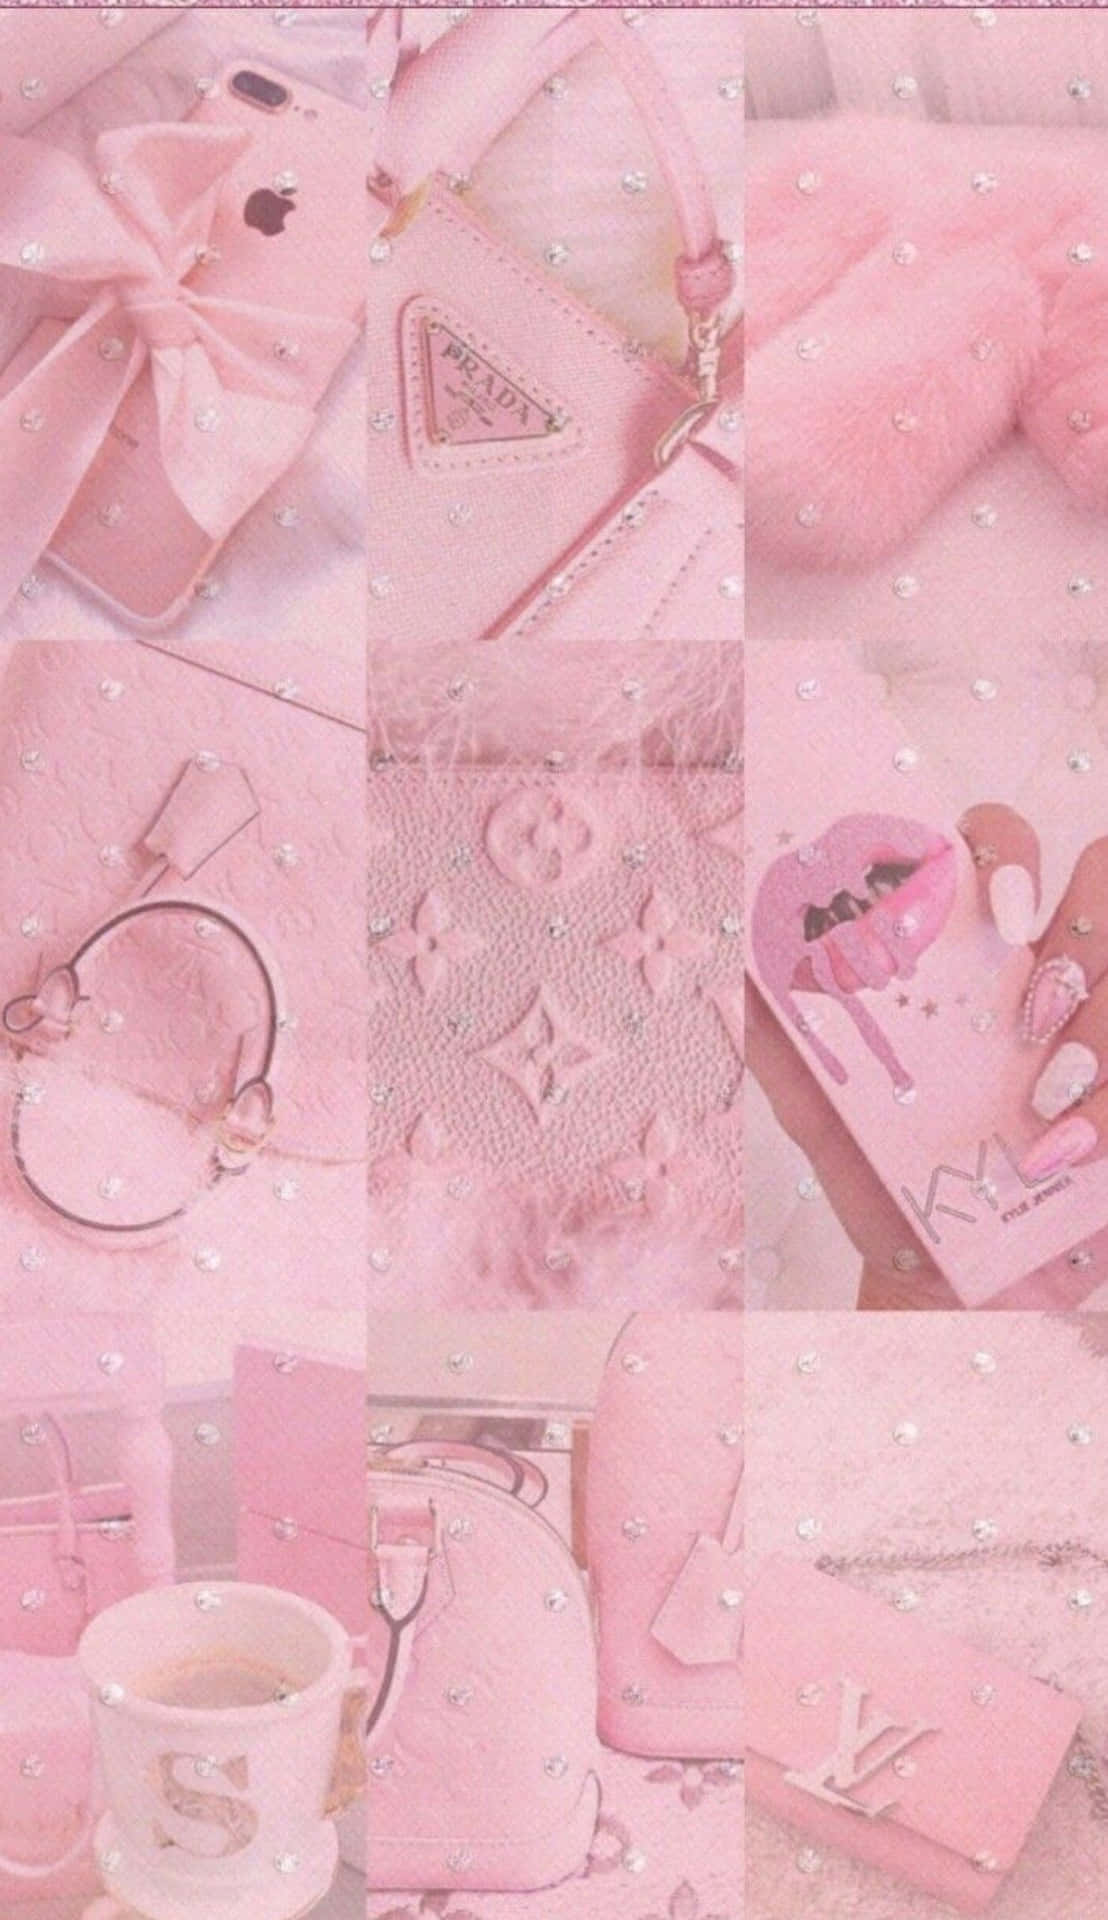 Aesthetic Pink Collage Of Designers Bags Wallpaper